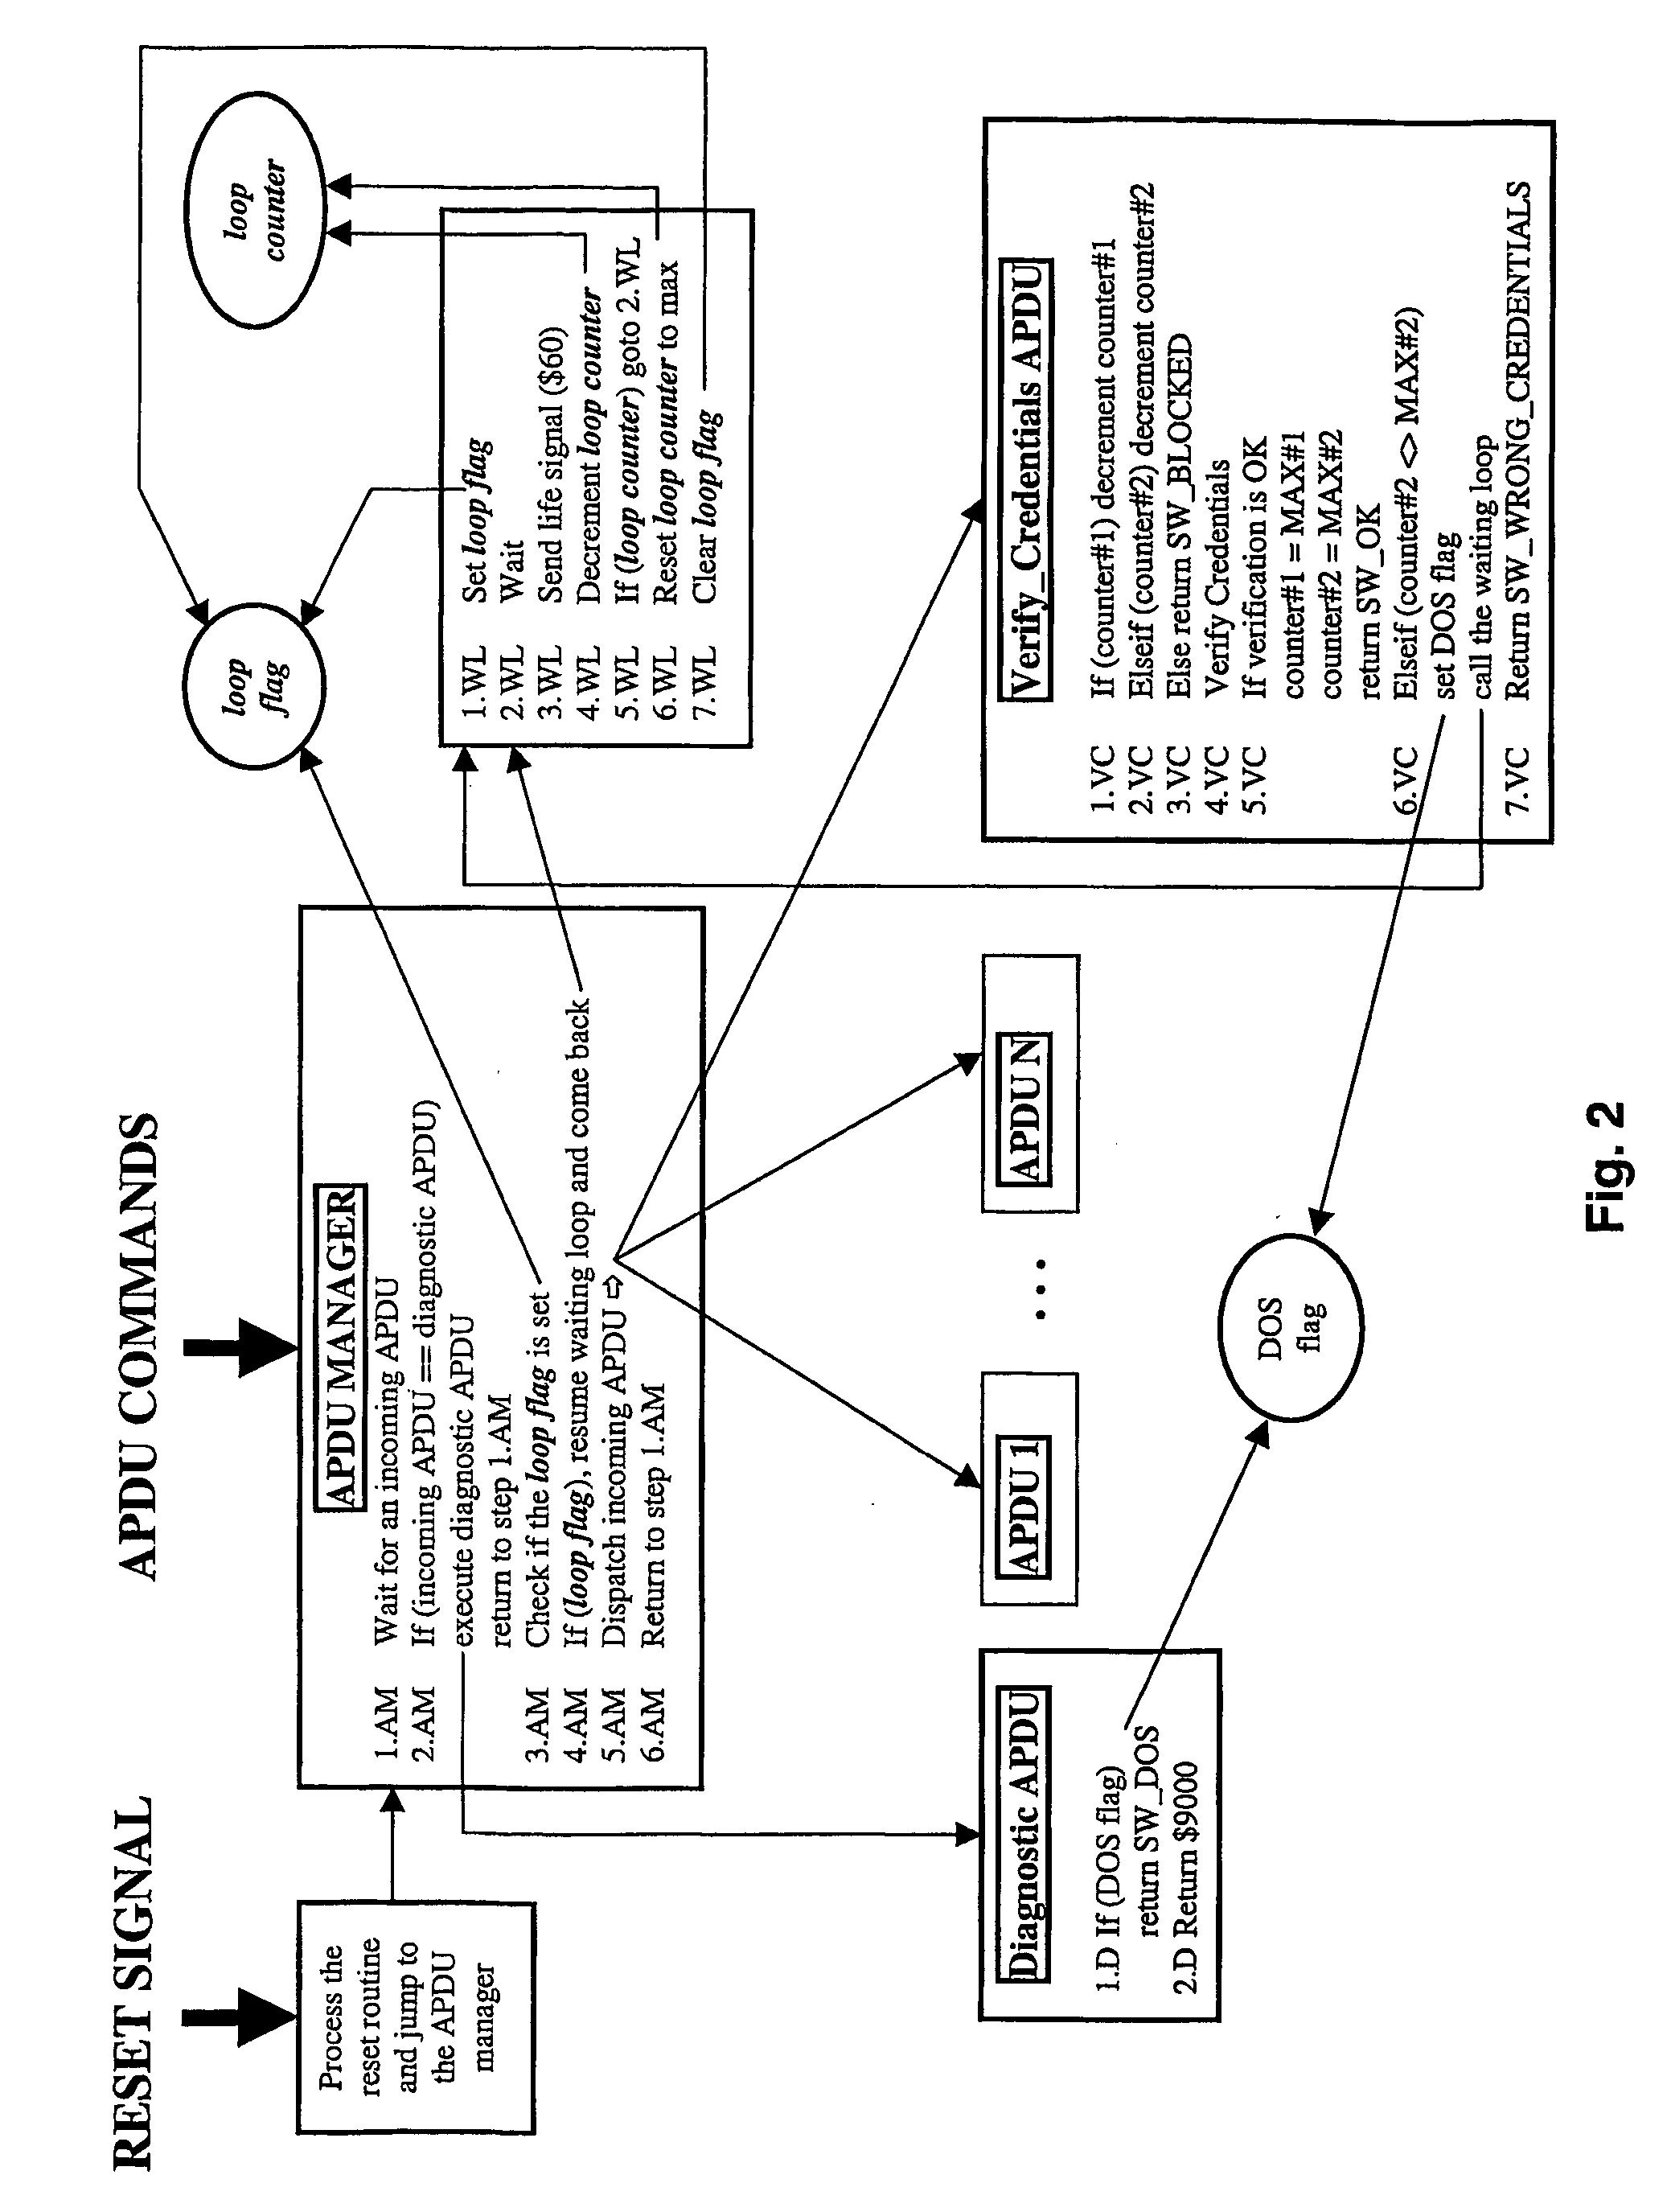 Protection of a portable object against denial of service type attacks